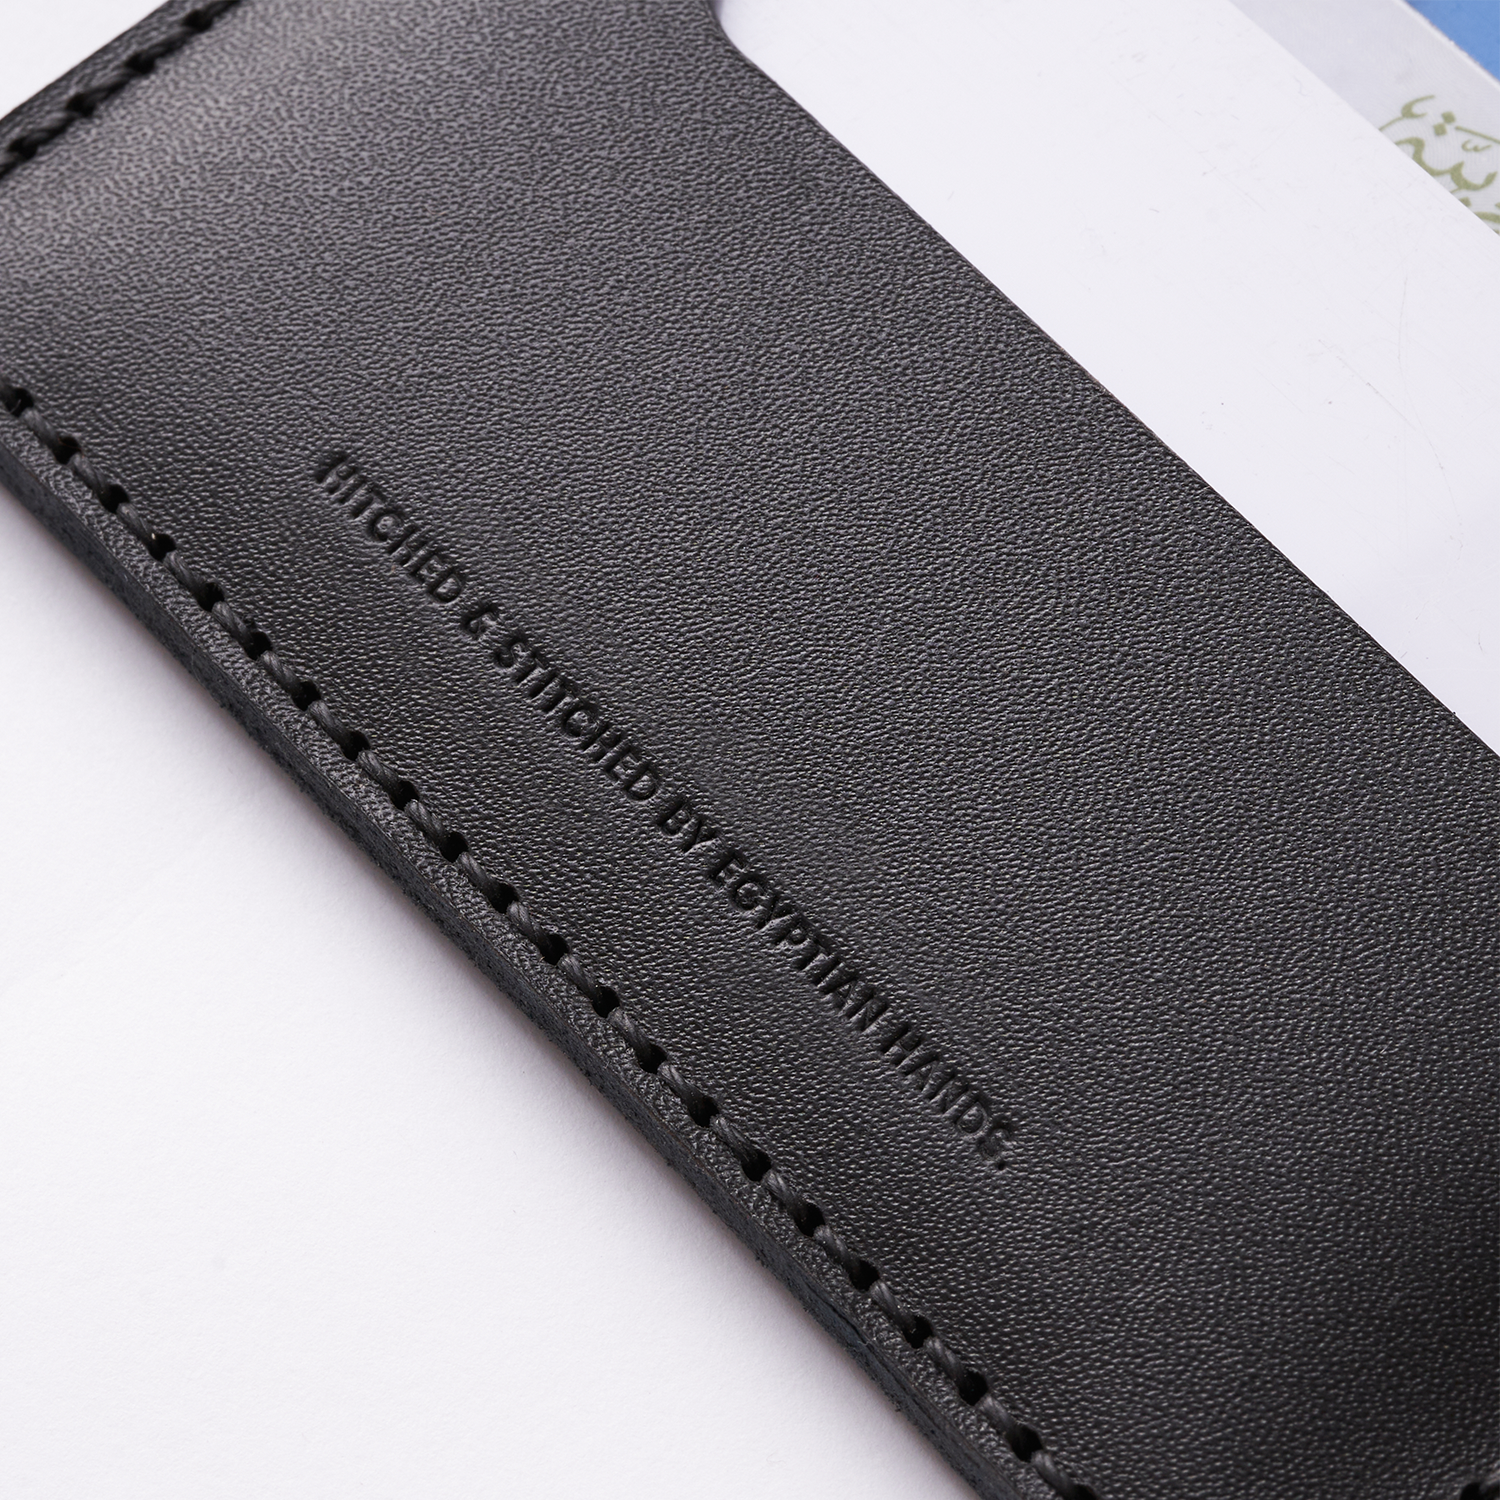 Black leather bifold wallet with stitched detailing, partially showing brand logo.